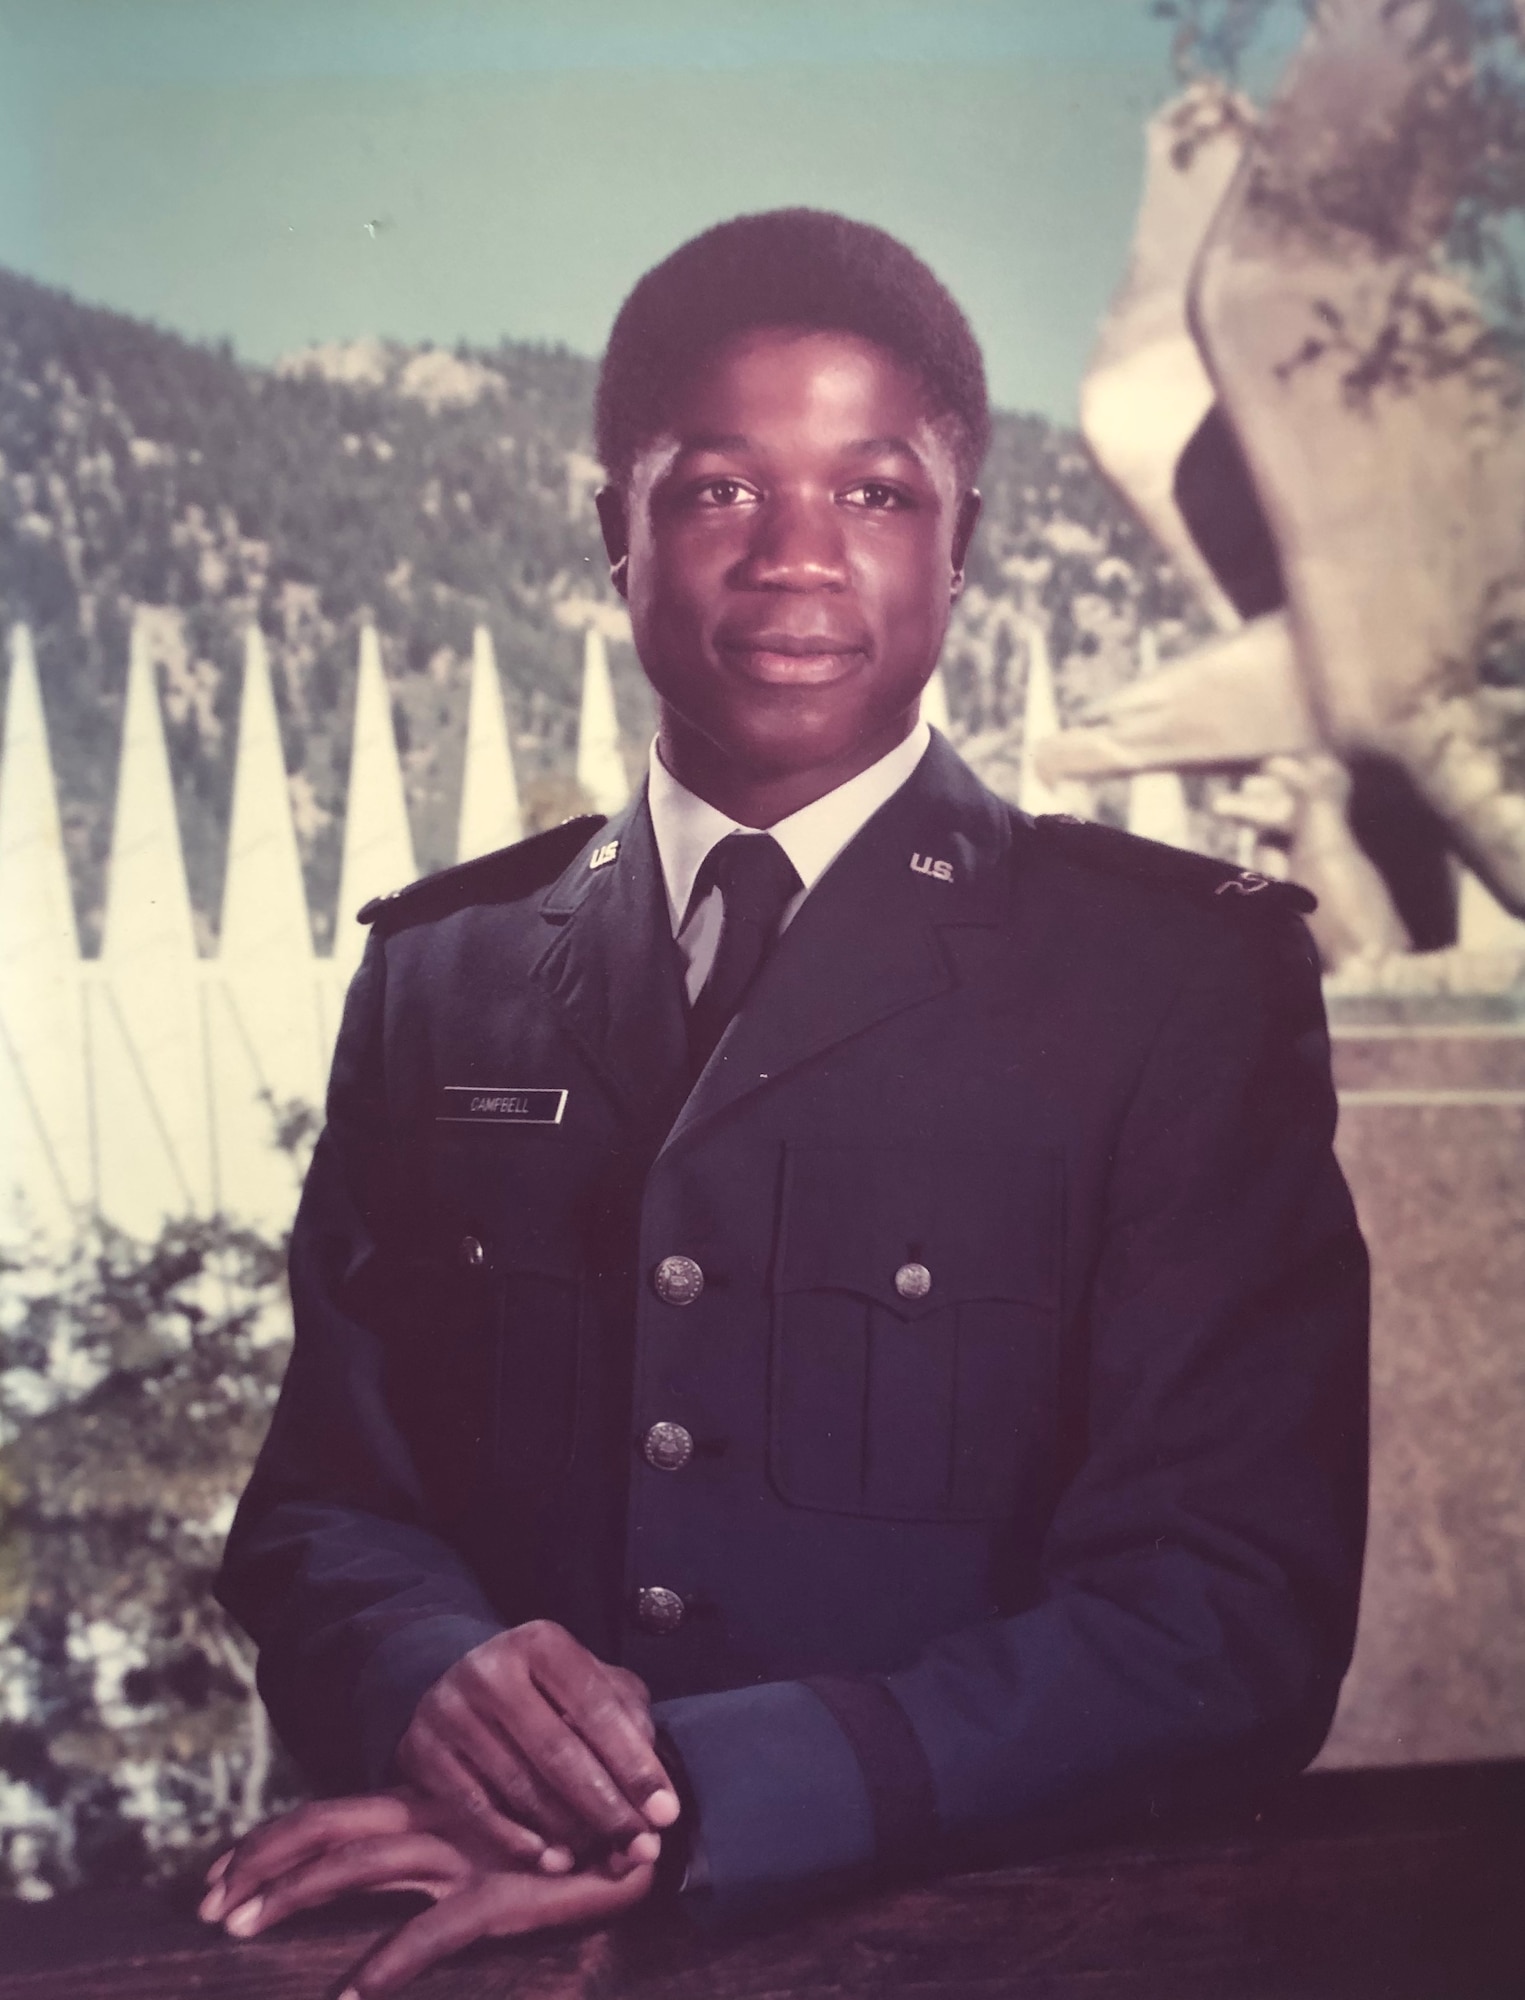 Col. Patrick Campbell's official photo from his freshman year at the U.S. Air Force Academy in 1976. Campbell went to the Academy Prep School from July 1975 to May 1976 and then was a USAFA cadet from June 1976 to May 1980. (Courtesy photo)